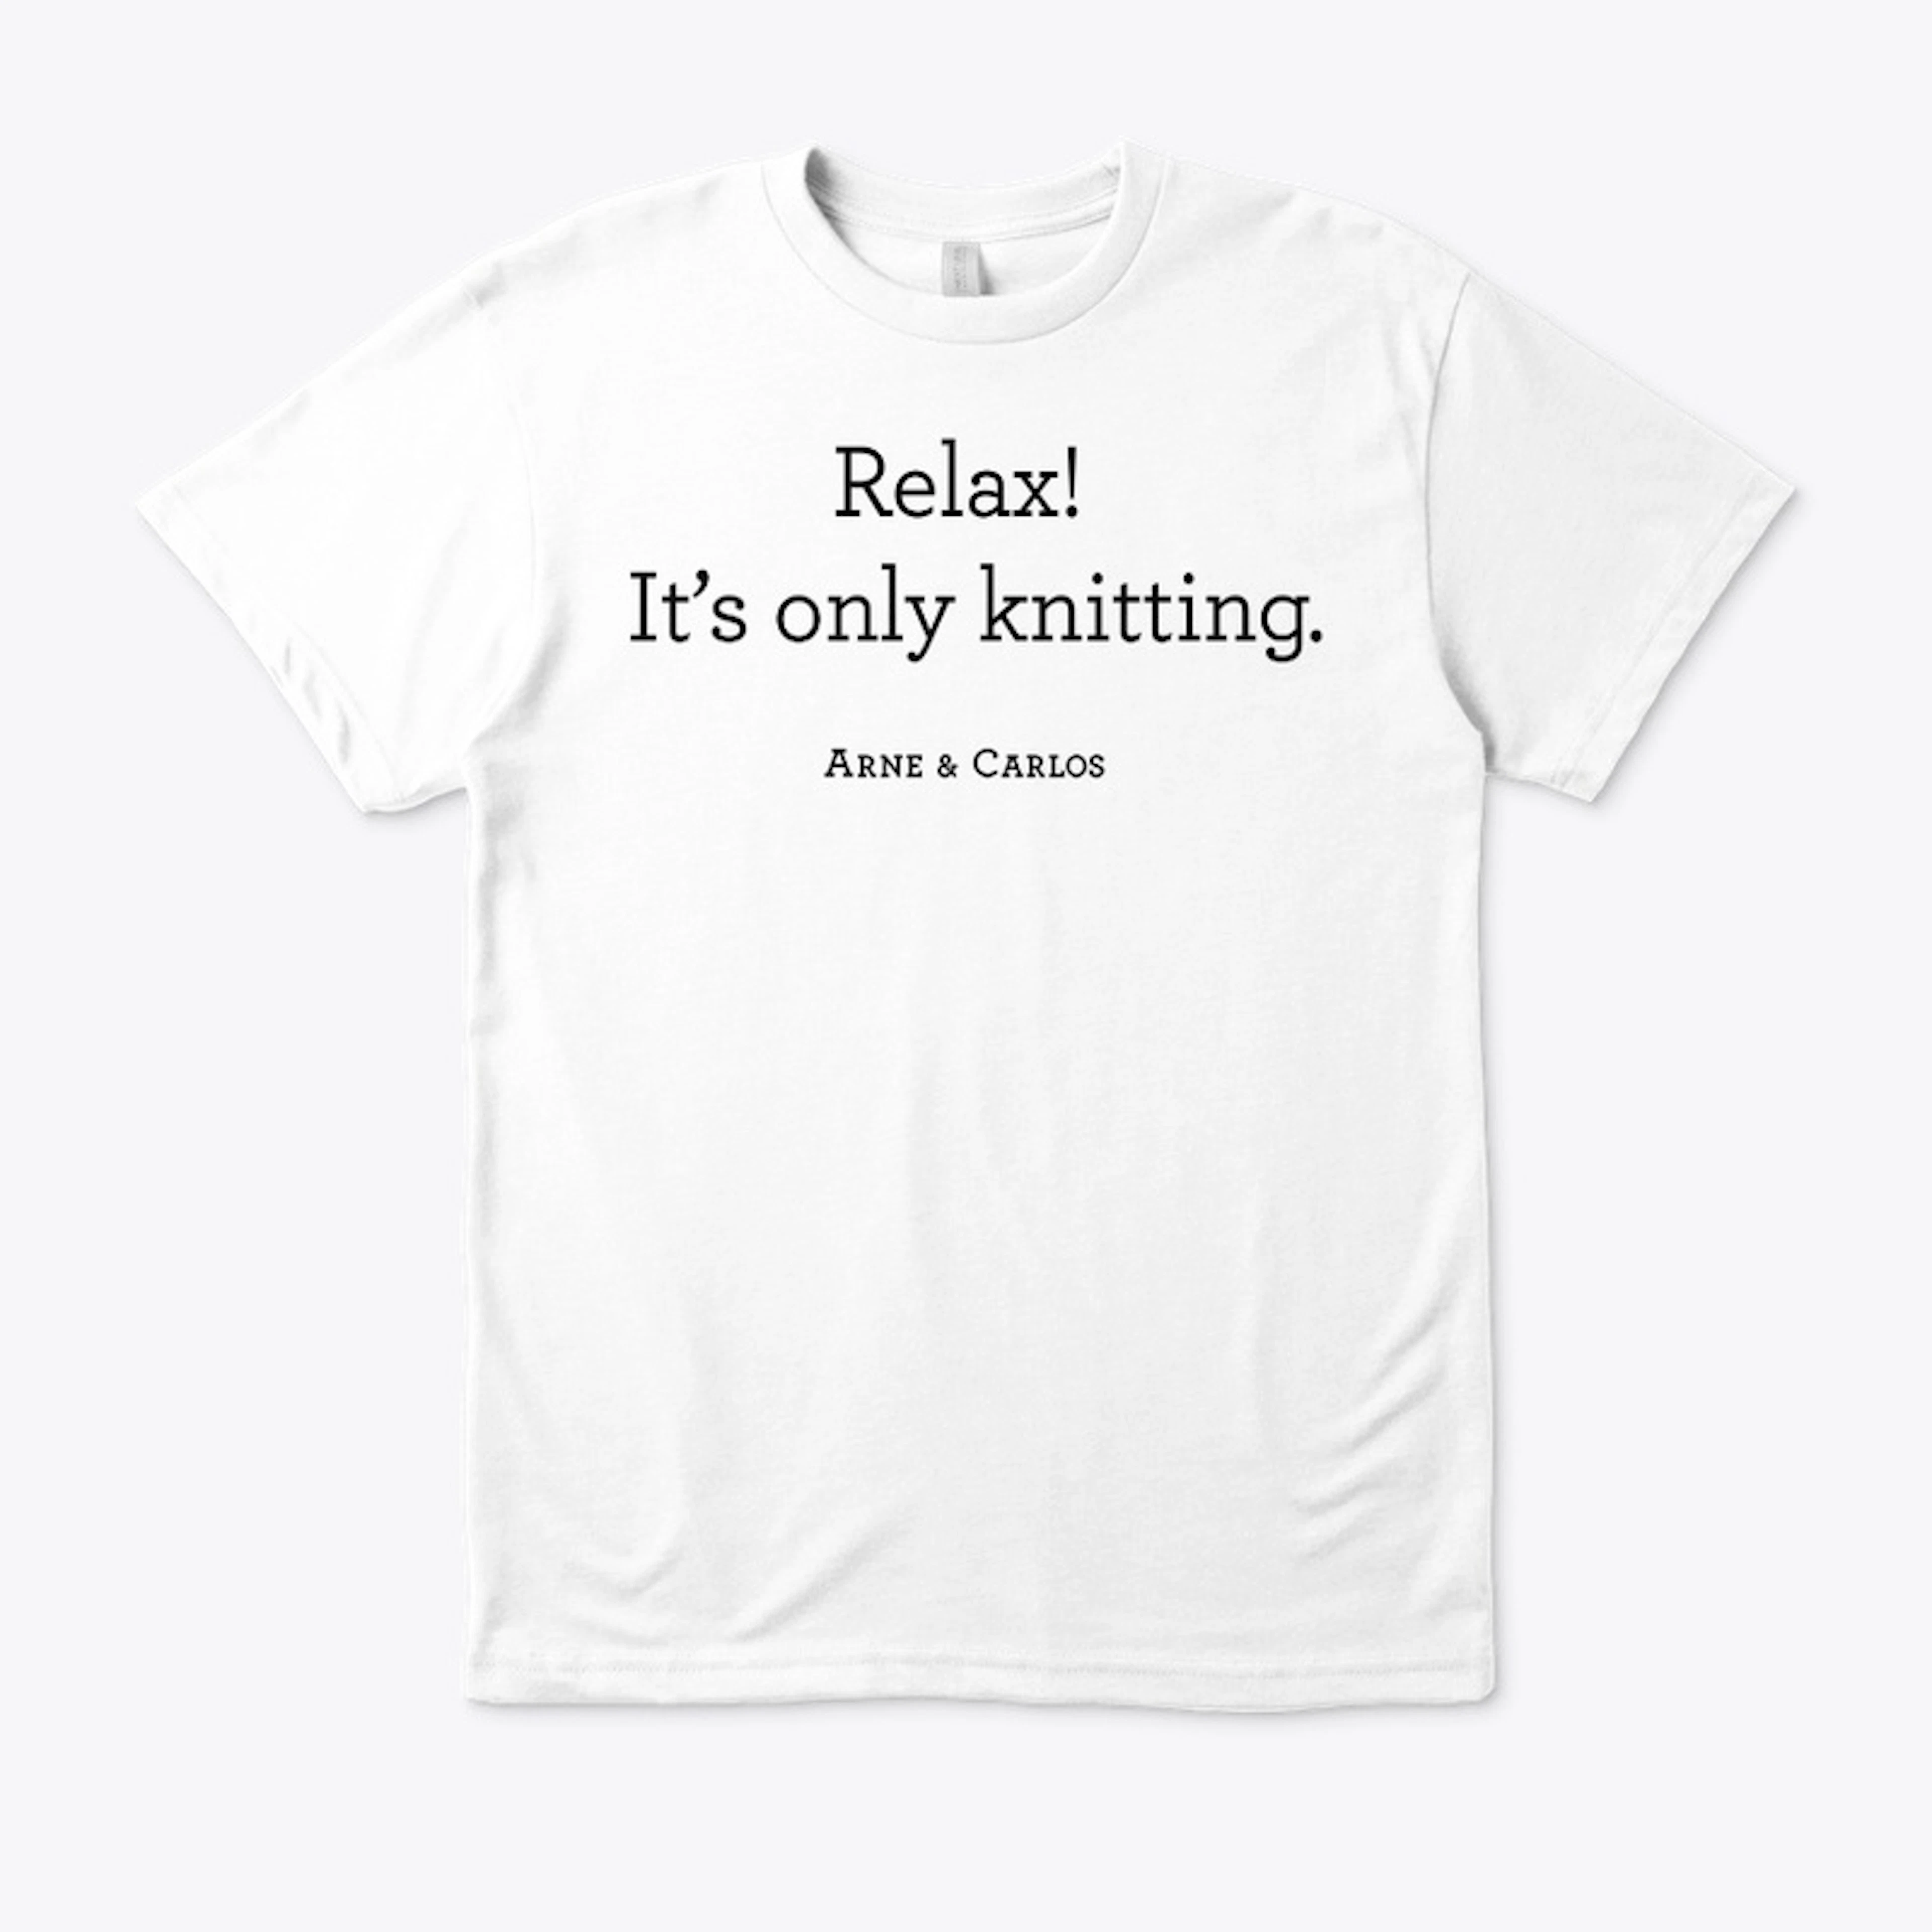 Relax! It's only knitting. 